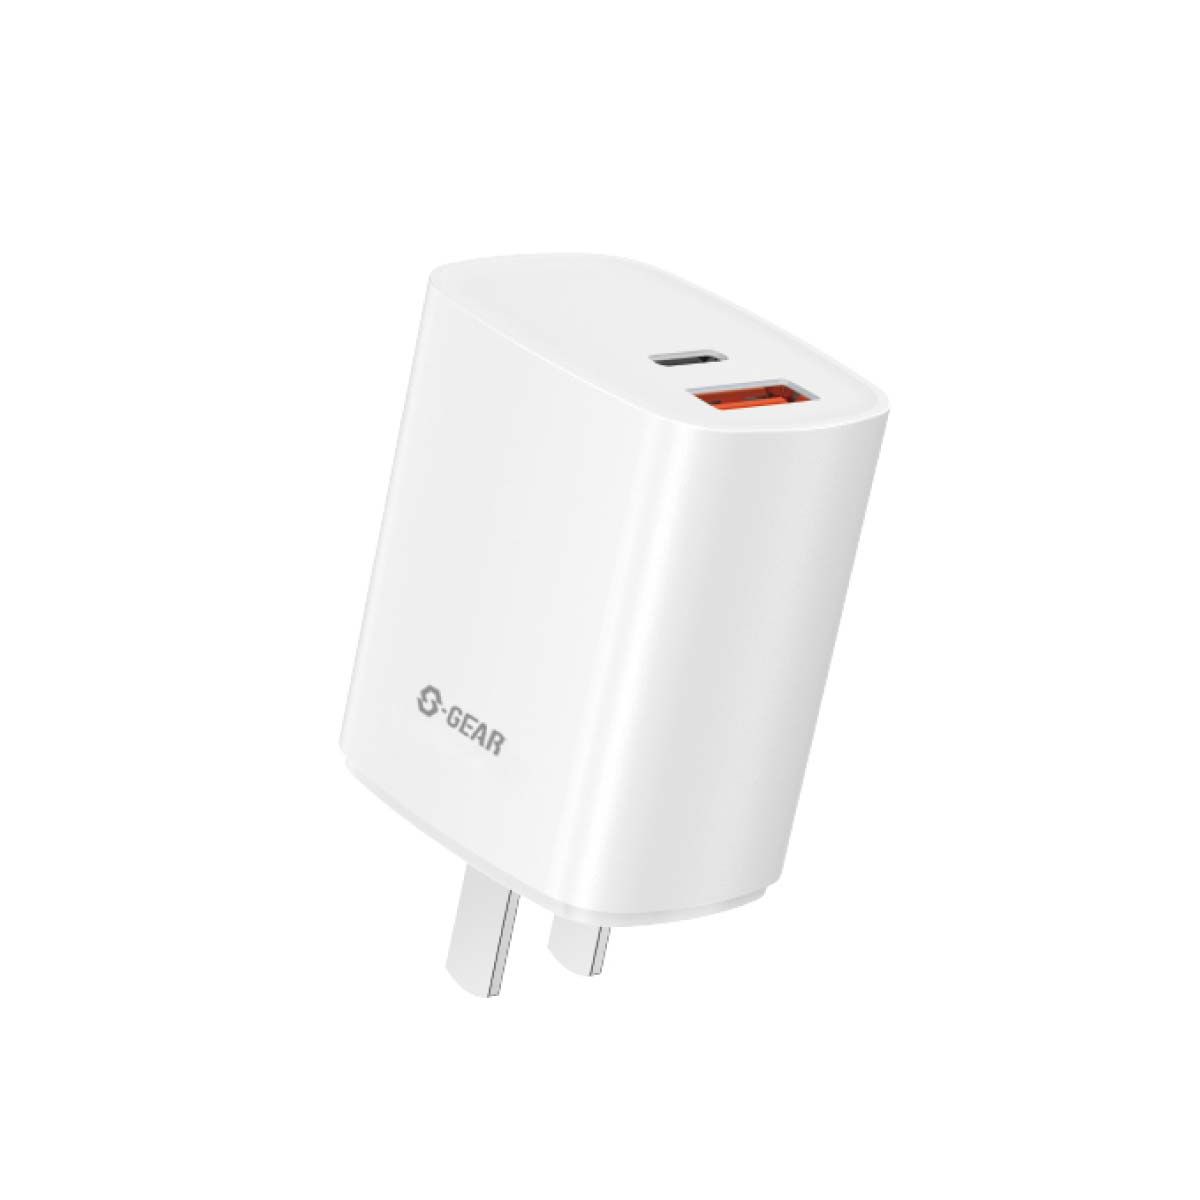 S-GEAR T51 Dual Adapter 30W Travel Charger